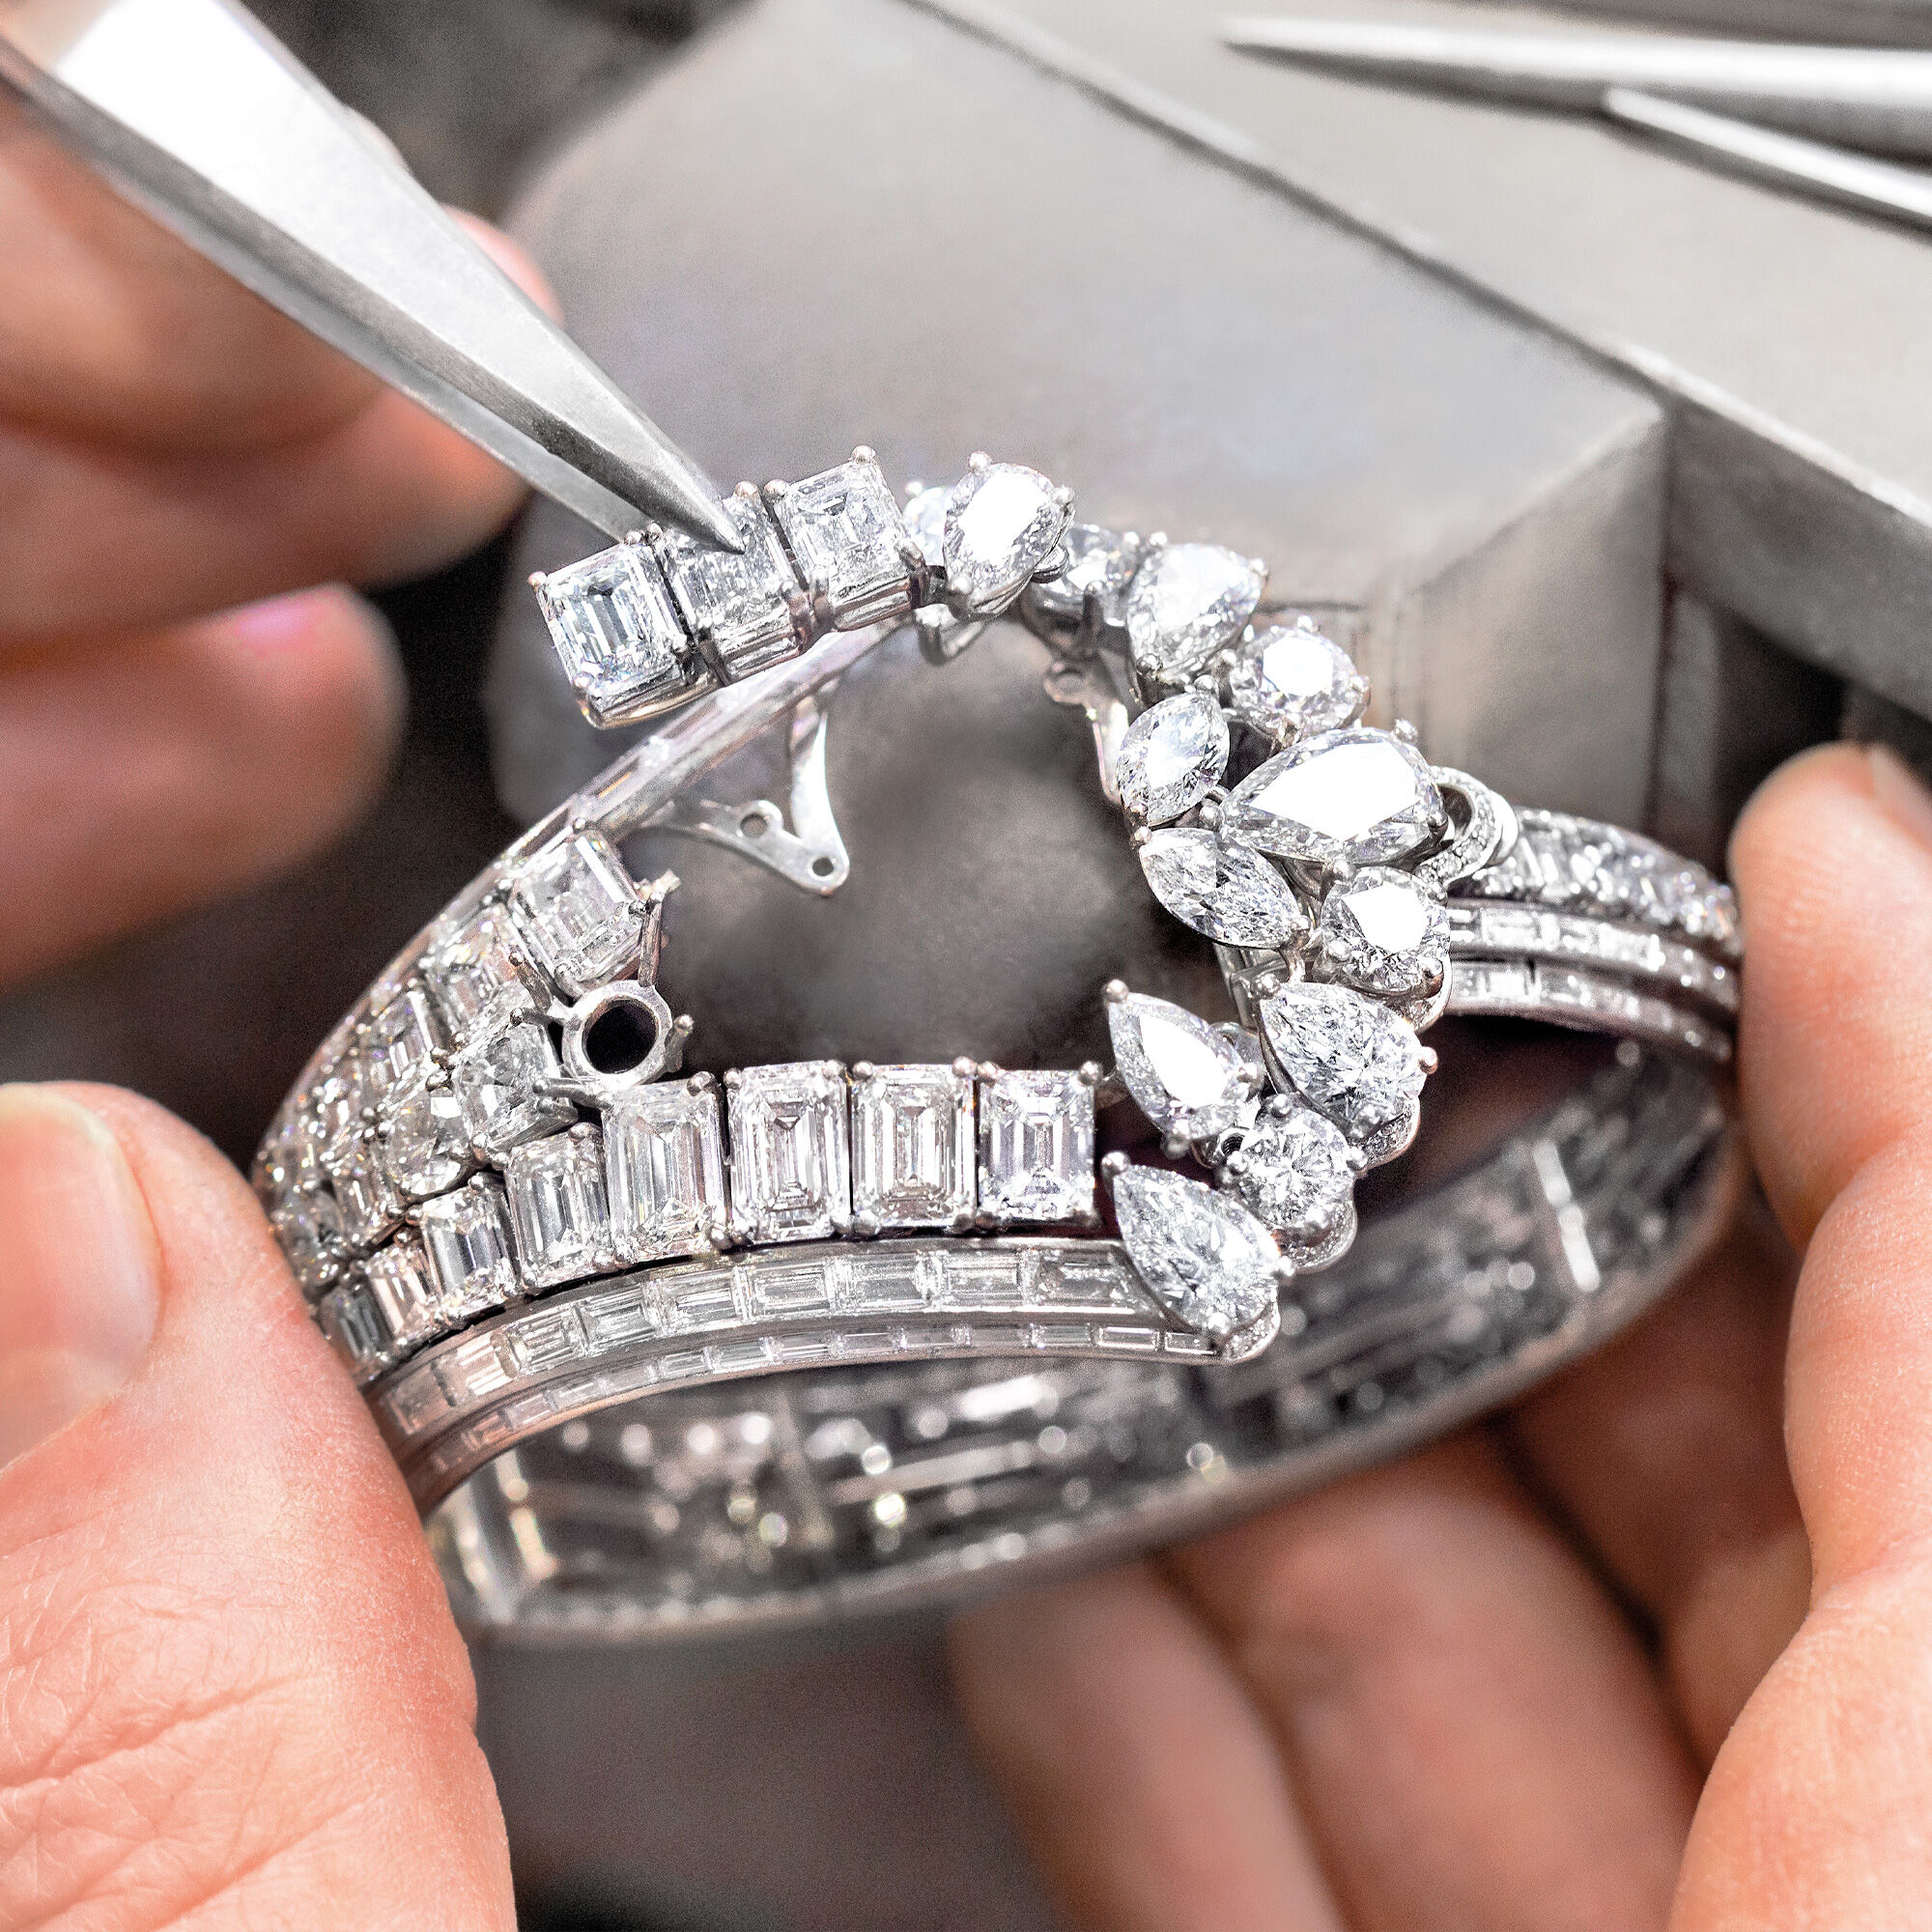 Garff Diamond setter seting the Graff Oval Diamond Secret Watch from the Graff unique timepieces collection